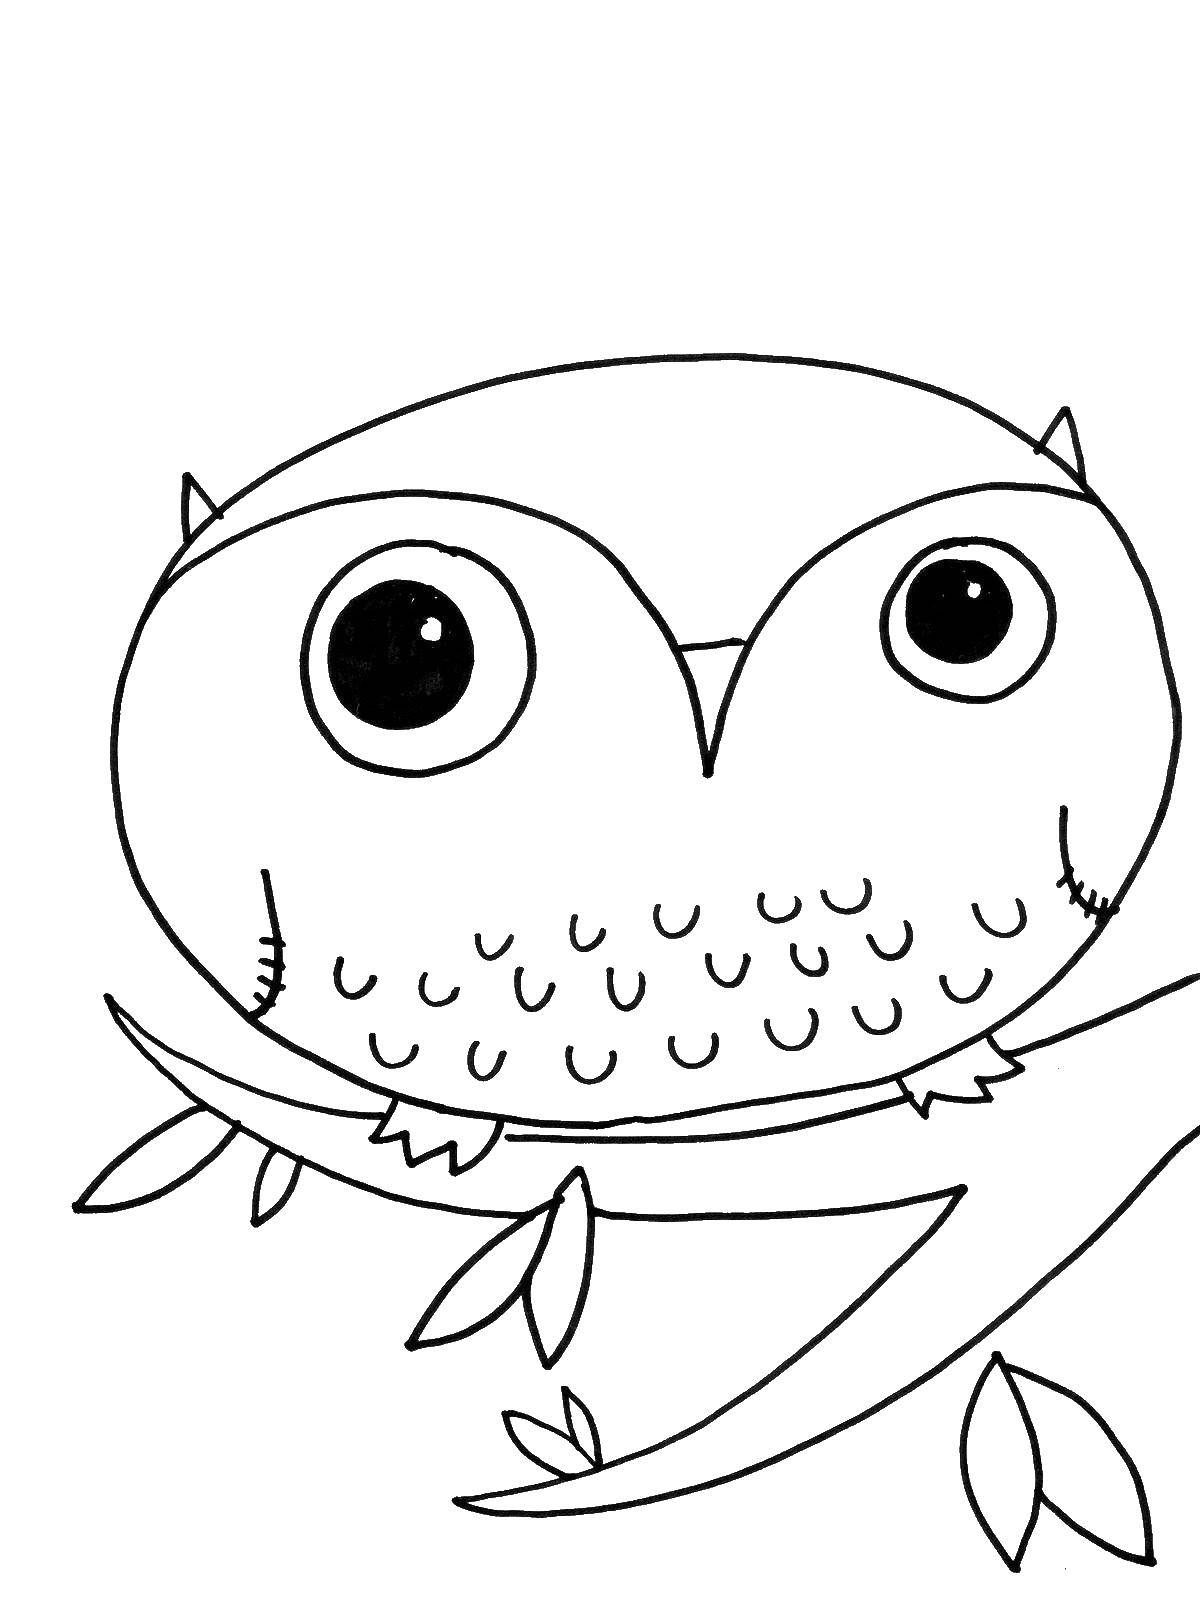 Coloring Owl sitting on the branch of a tree. Category Coloring pages for kids. Tags:  Forest, trees, owl.